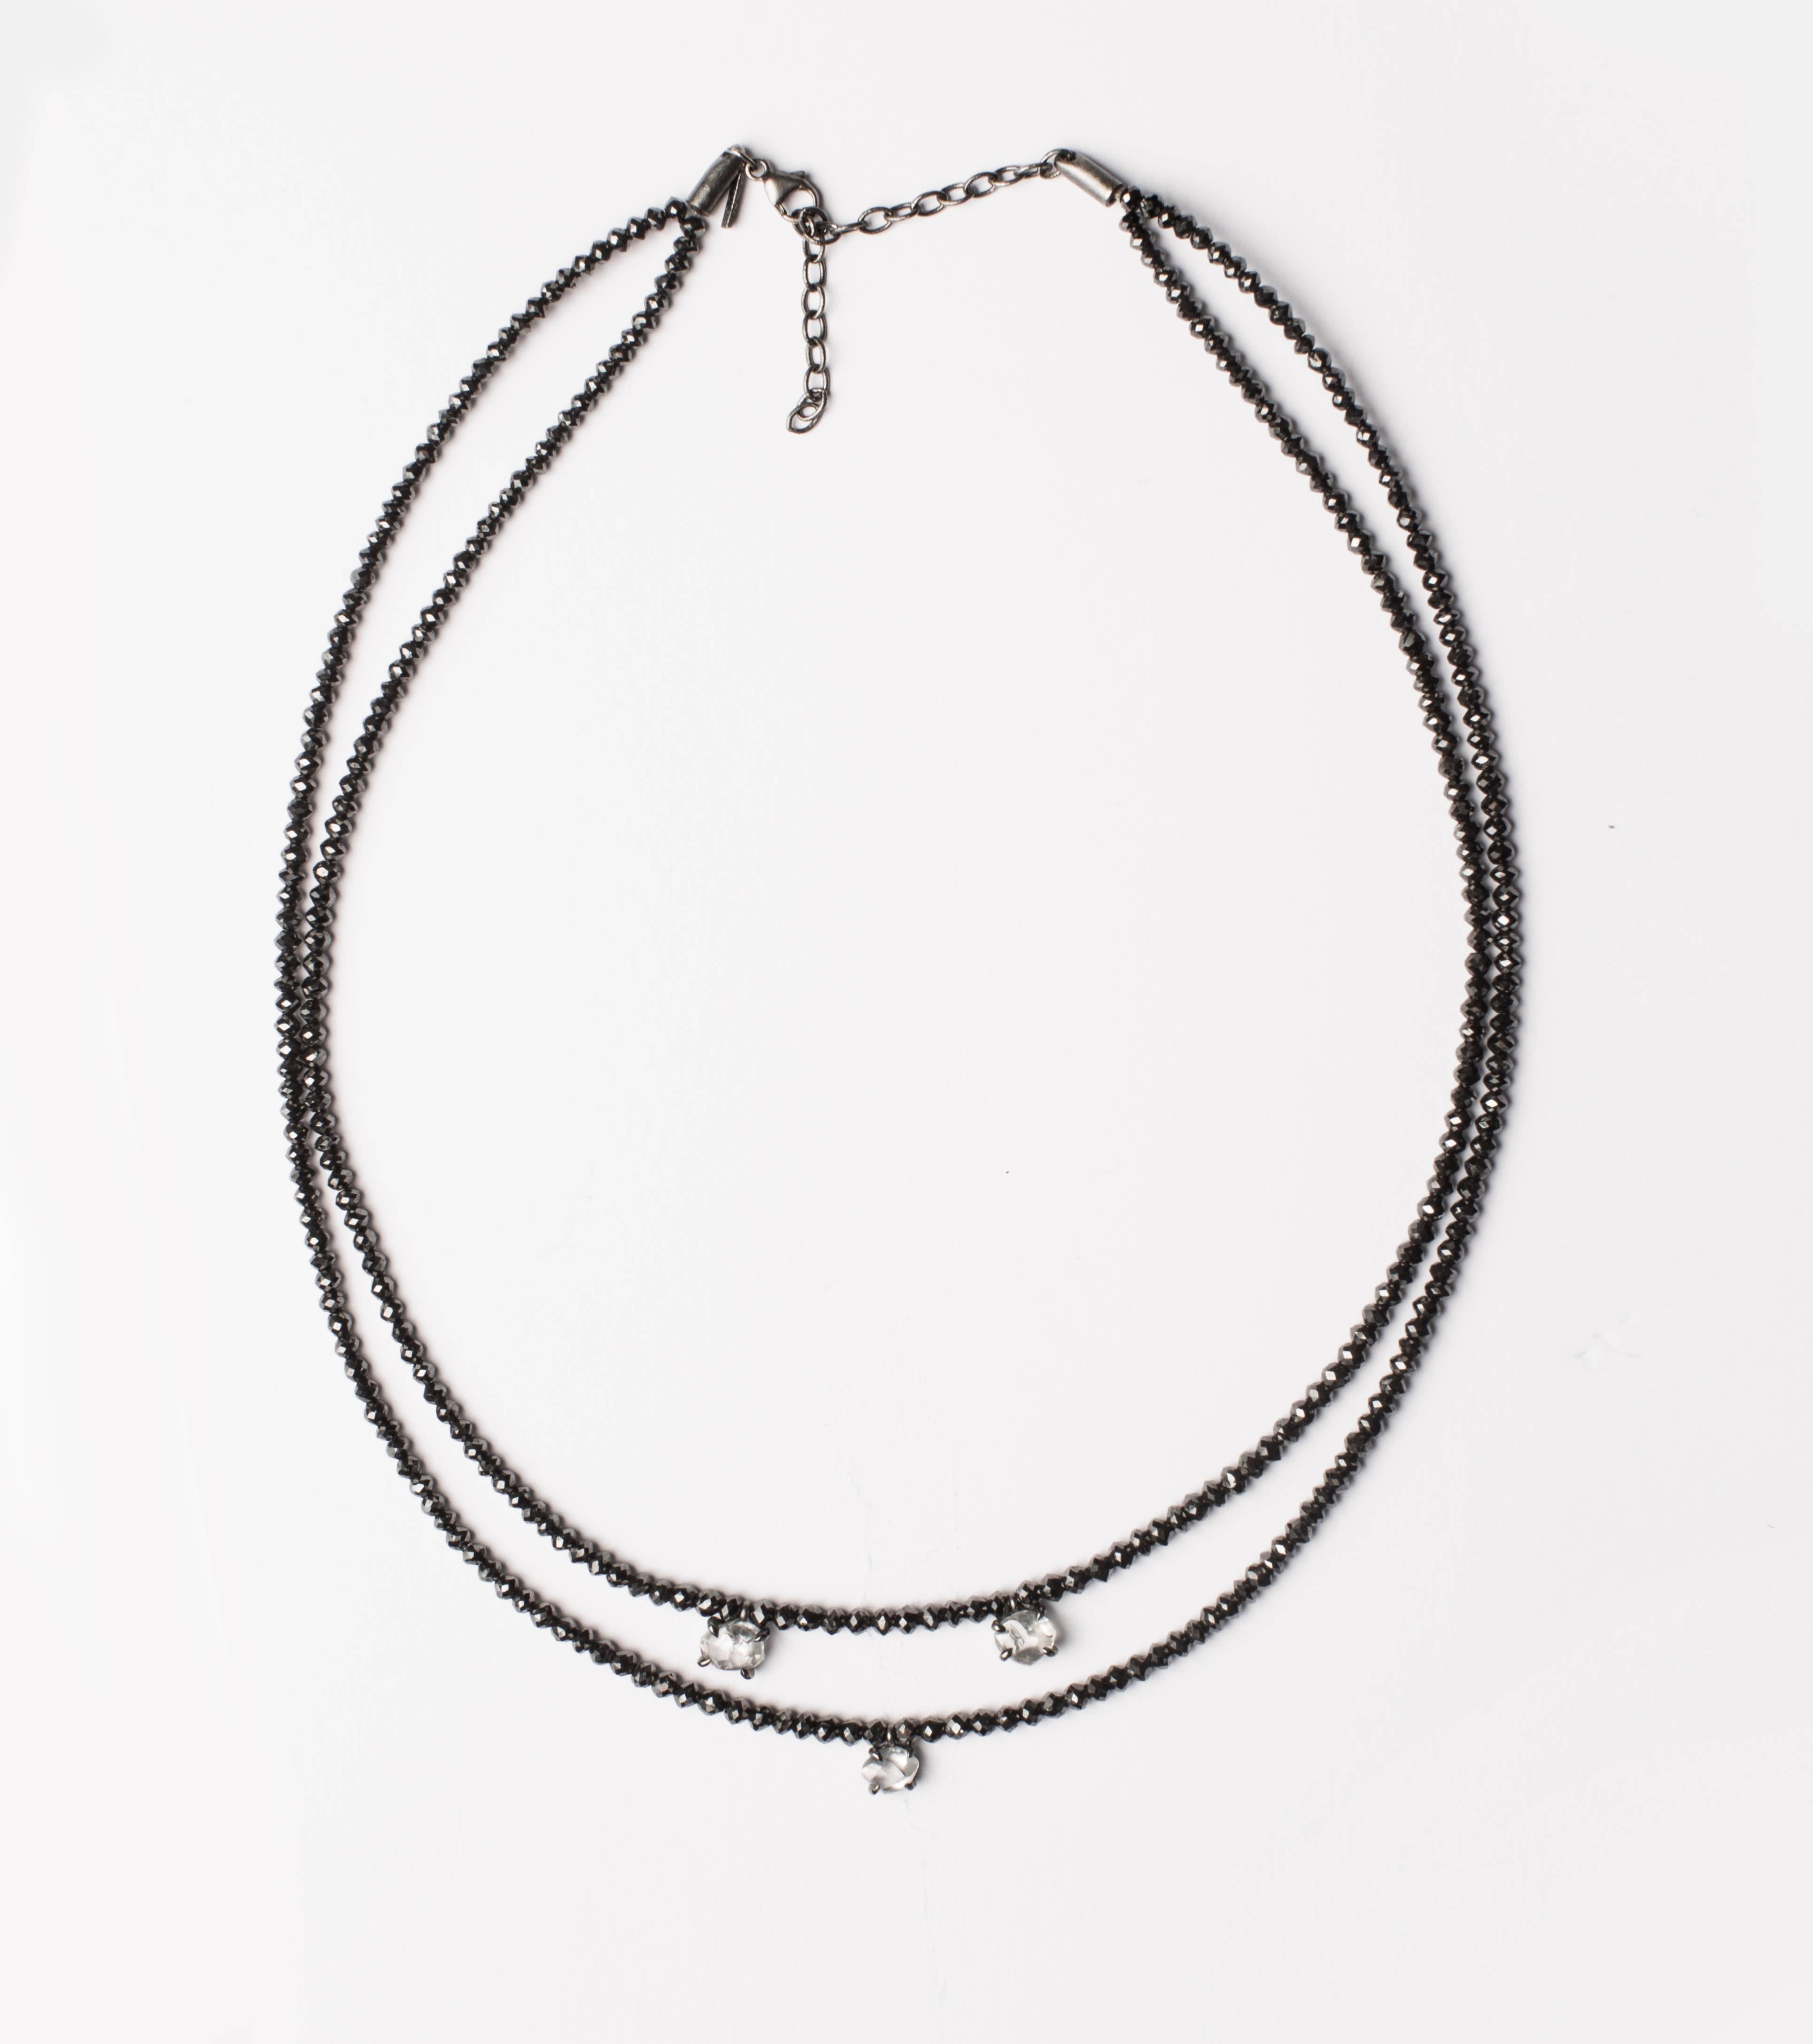 3.39 ct. natural whitish round rough diamonds adorns two strings of 65.27 ct. black facetted diamonds set as one gorgeous necklace. A new elegant, yet understated, way of wearing diamonds.

Every rough diamond from Roughdiamonds dk has been